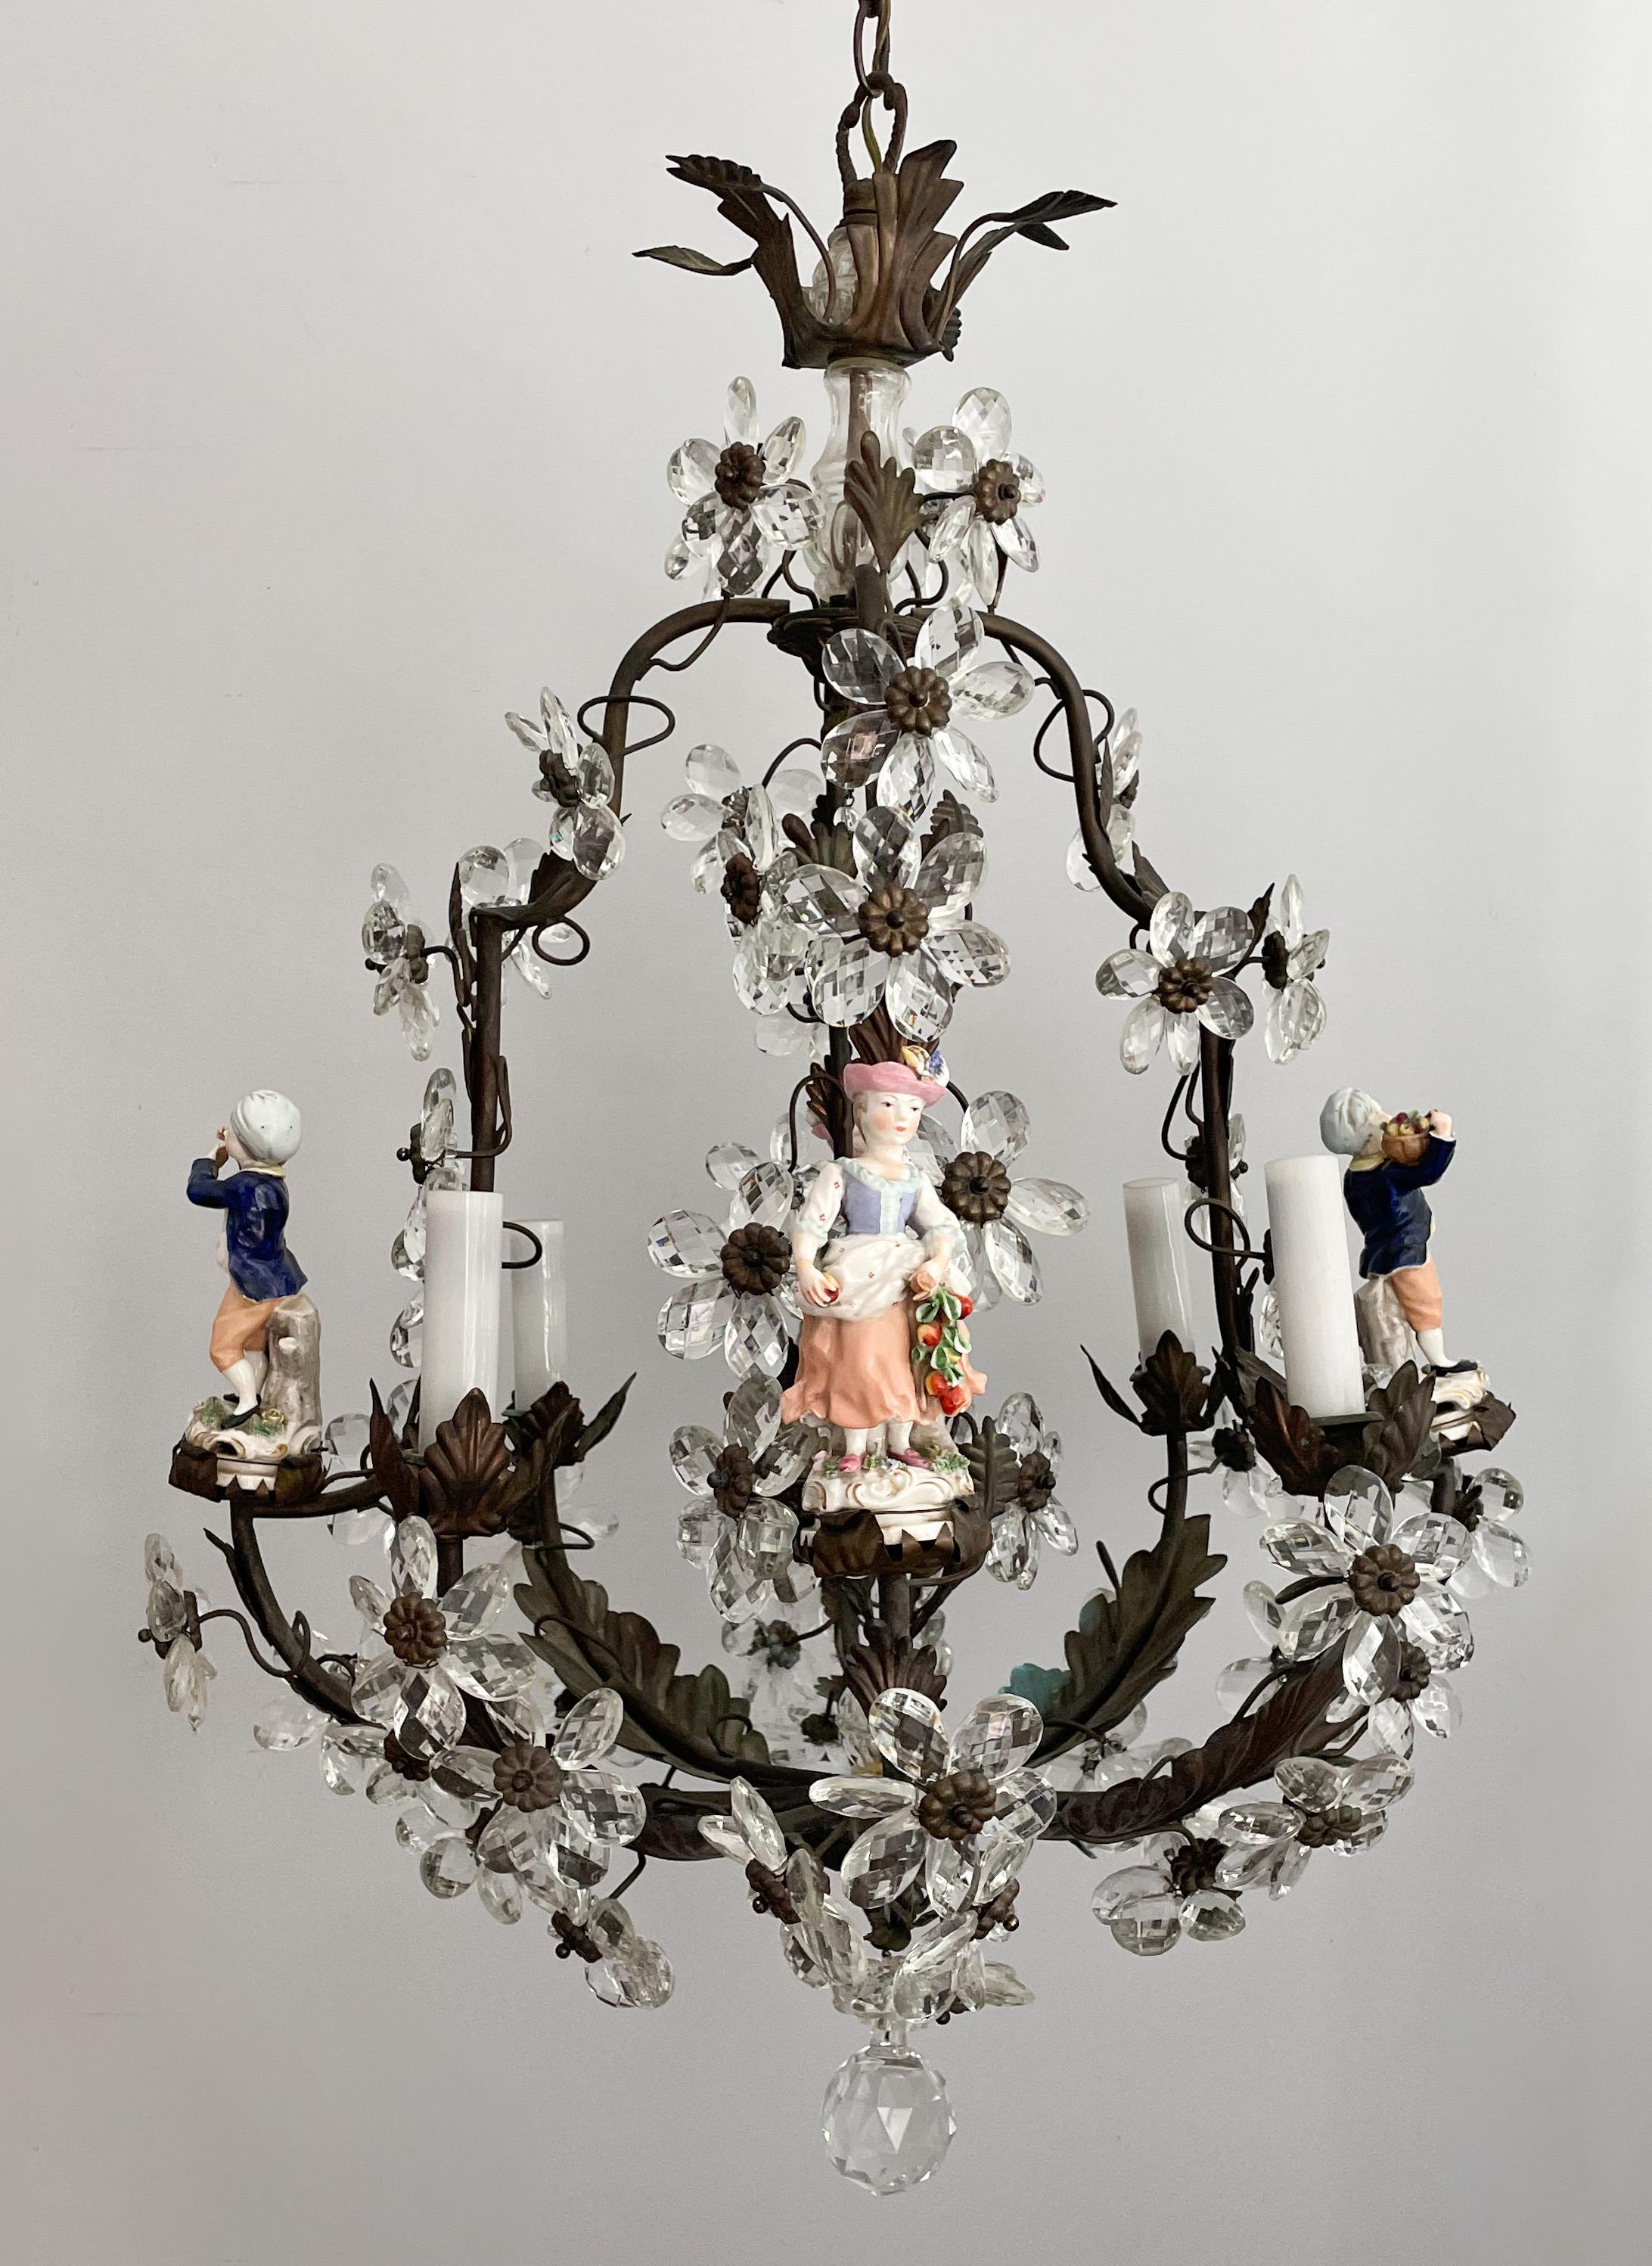 Gorgeous, French 1940s bronze, crystal and porcelain chandelier in the provincial style.

The chandelier consists of a bronze frame decorated with an abundance of flowers made of faceted crystal prisms and porcelain figurines.

The chandelier is